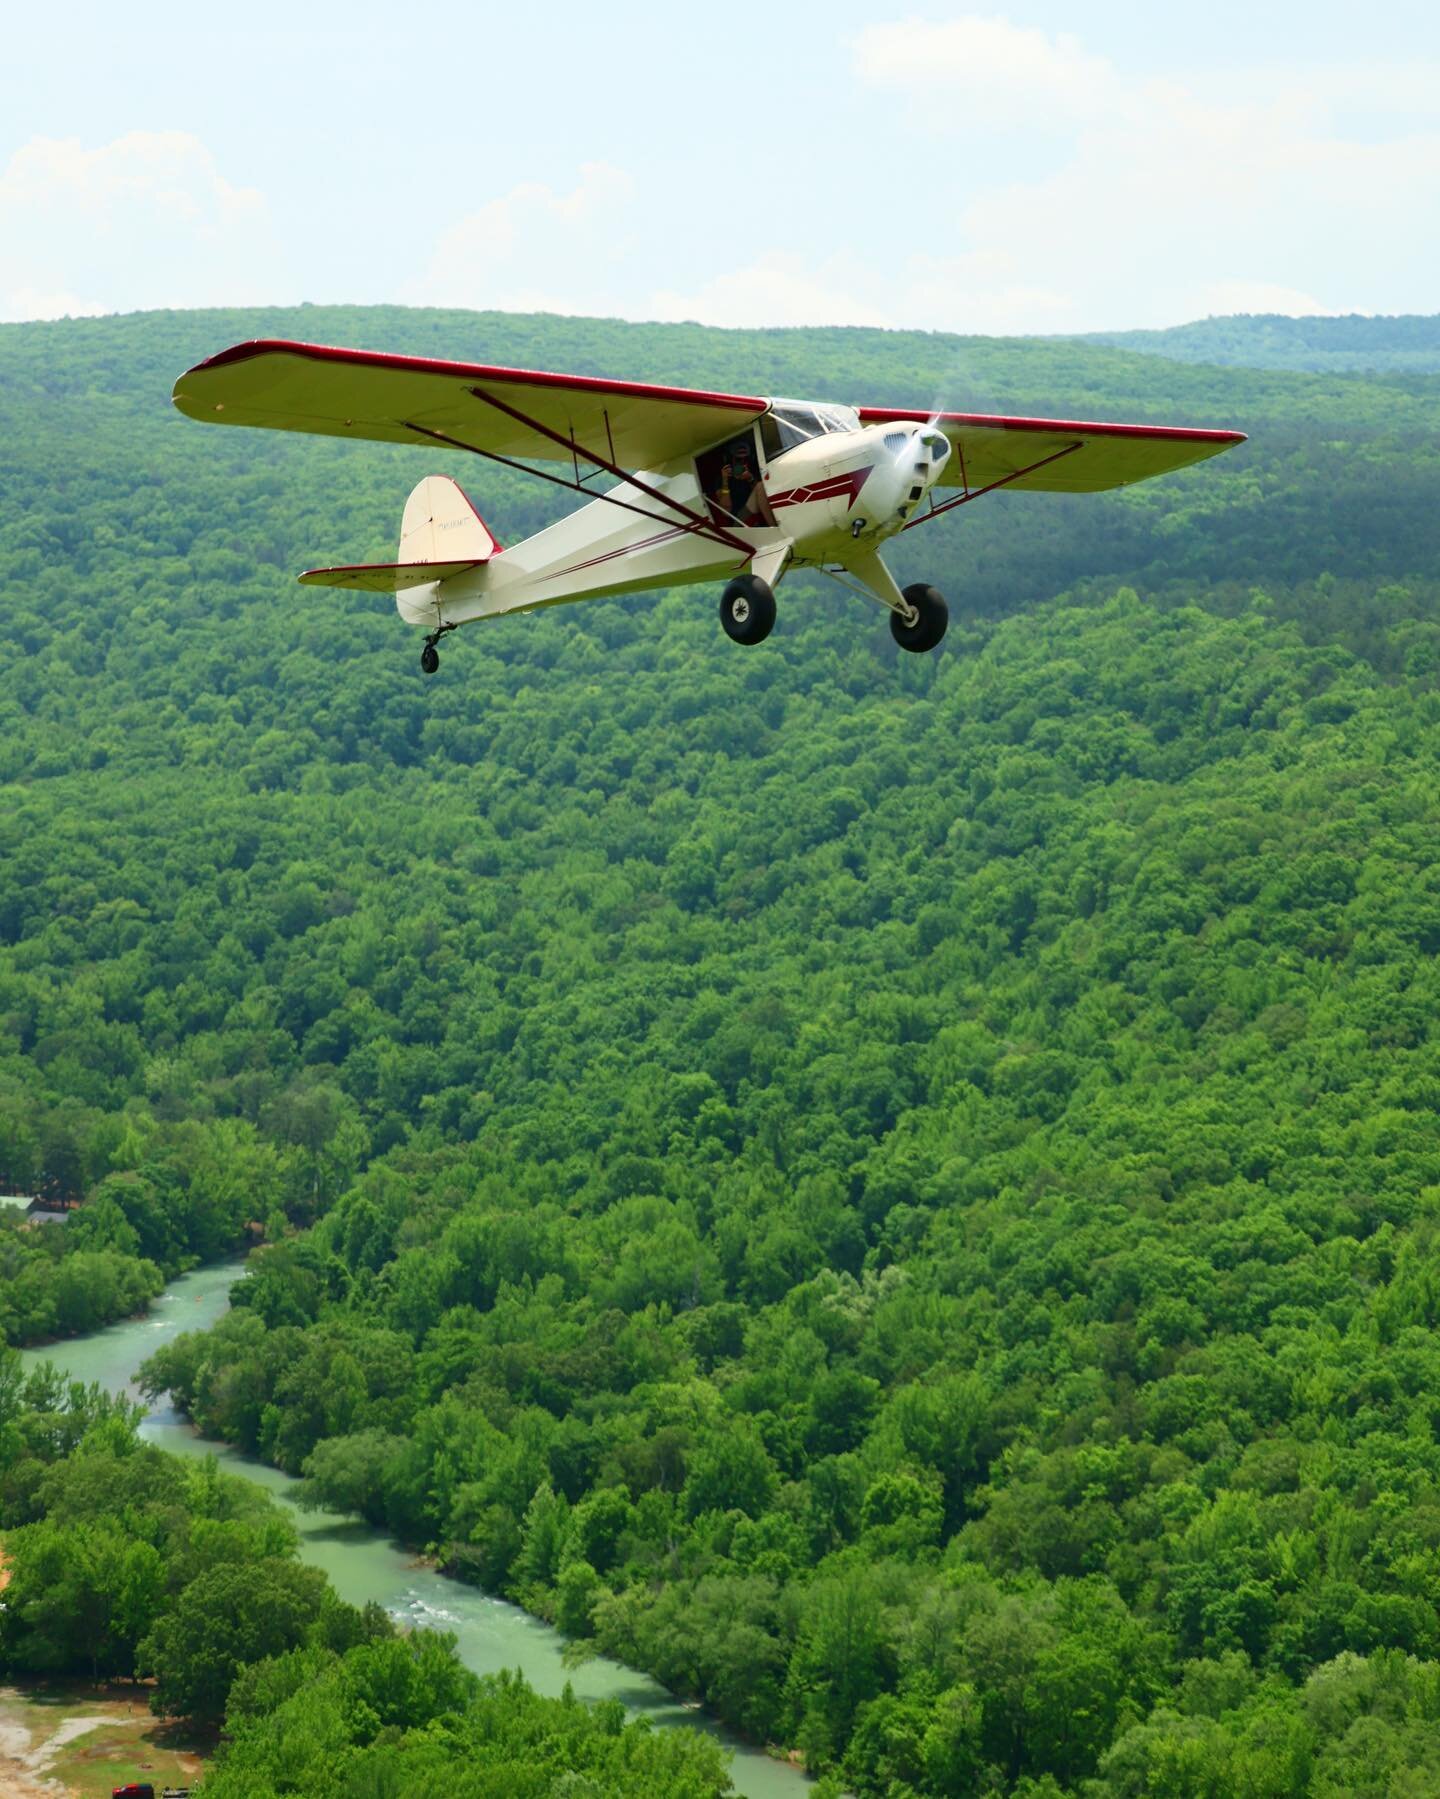 The unmatched beauty of the Ozarks here in Arkansas.  This beautiful picture was taken by @zakheald of the Mulberry river at @byrdsadventurecenter 

Pilot @kevinhopkins81 

@arkansas @only_in_arkansas #arkansas #aviation #airplane #aviation4u #tailwh